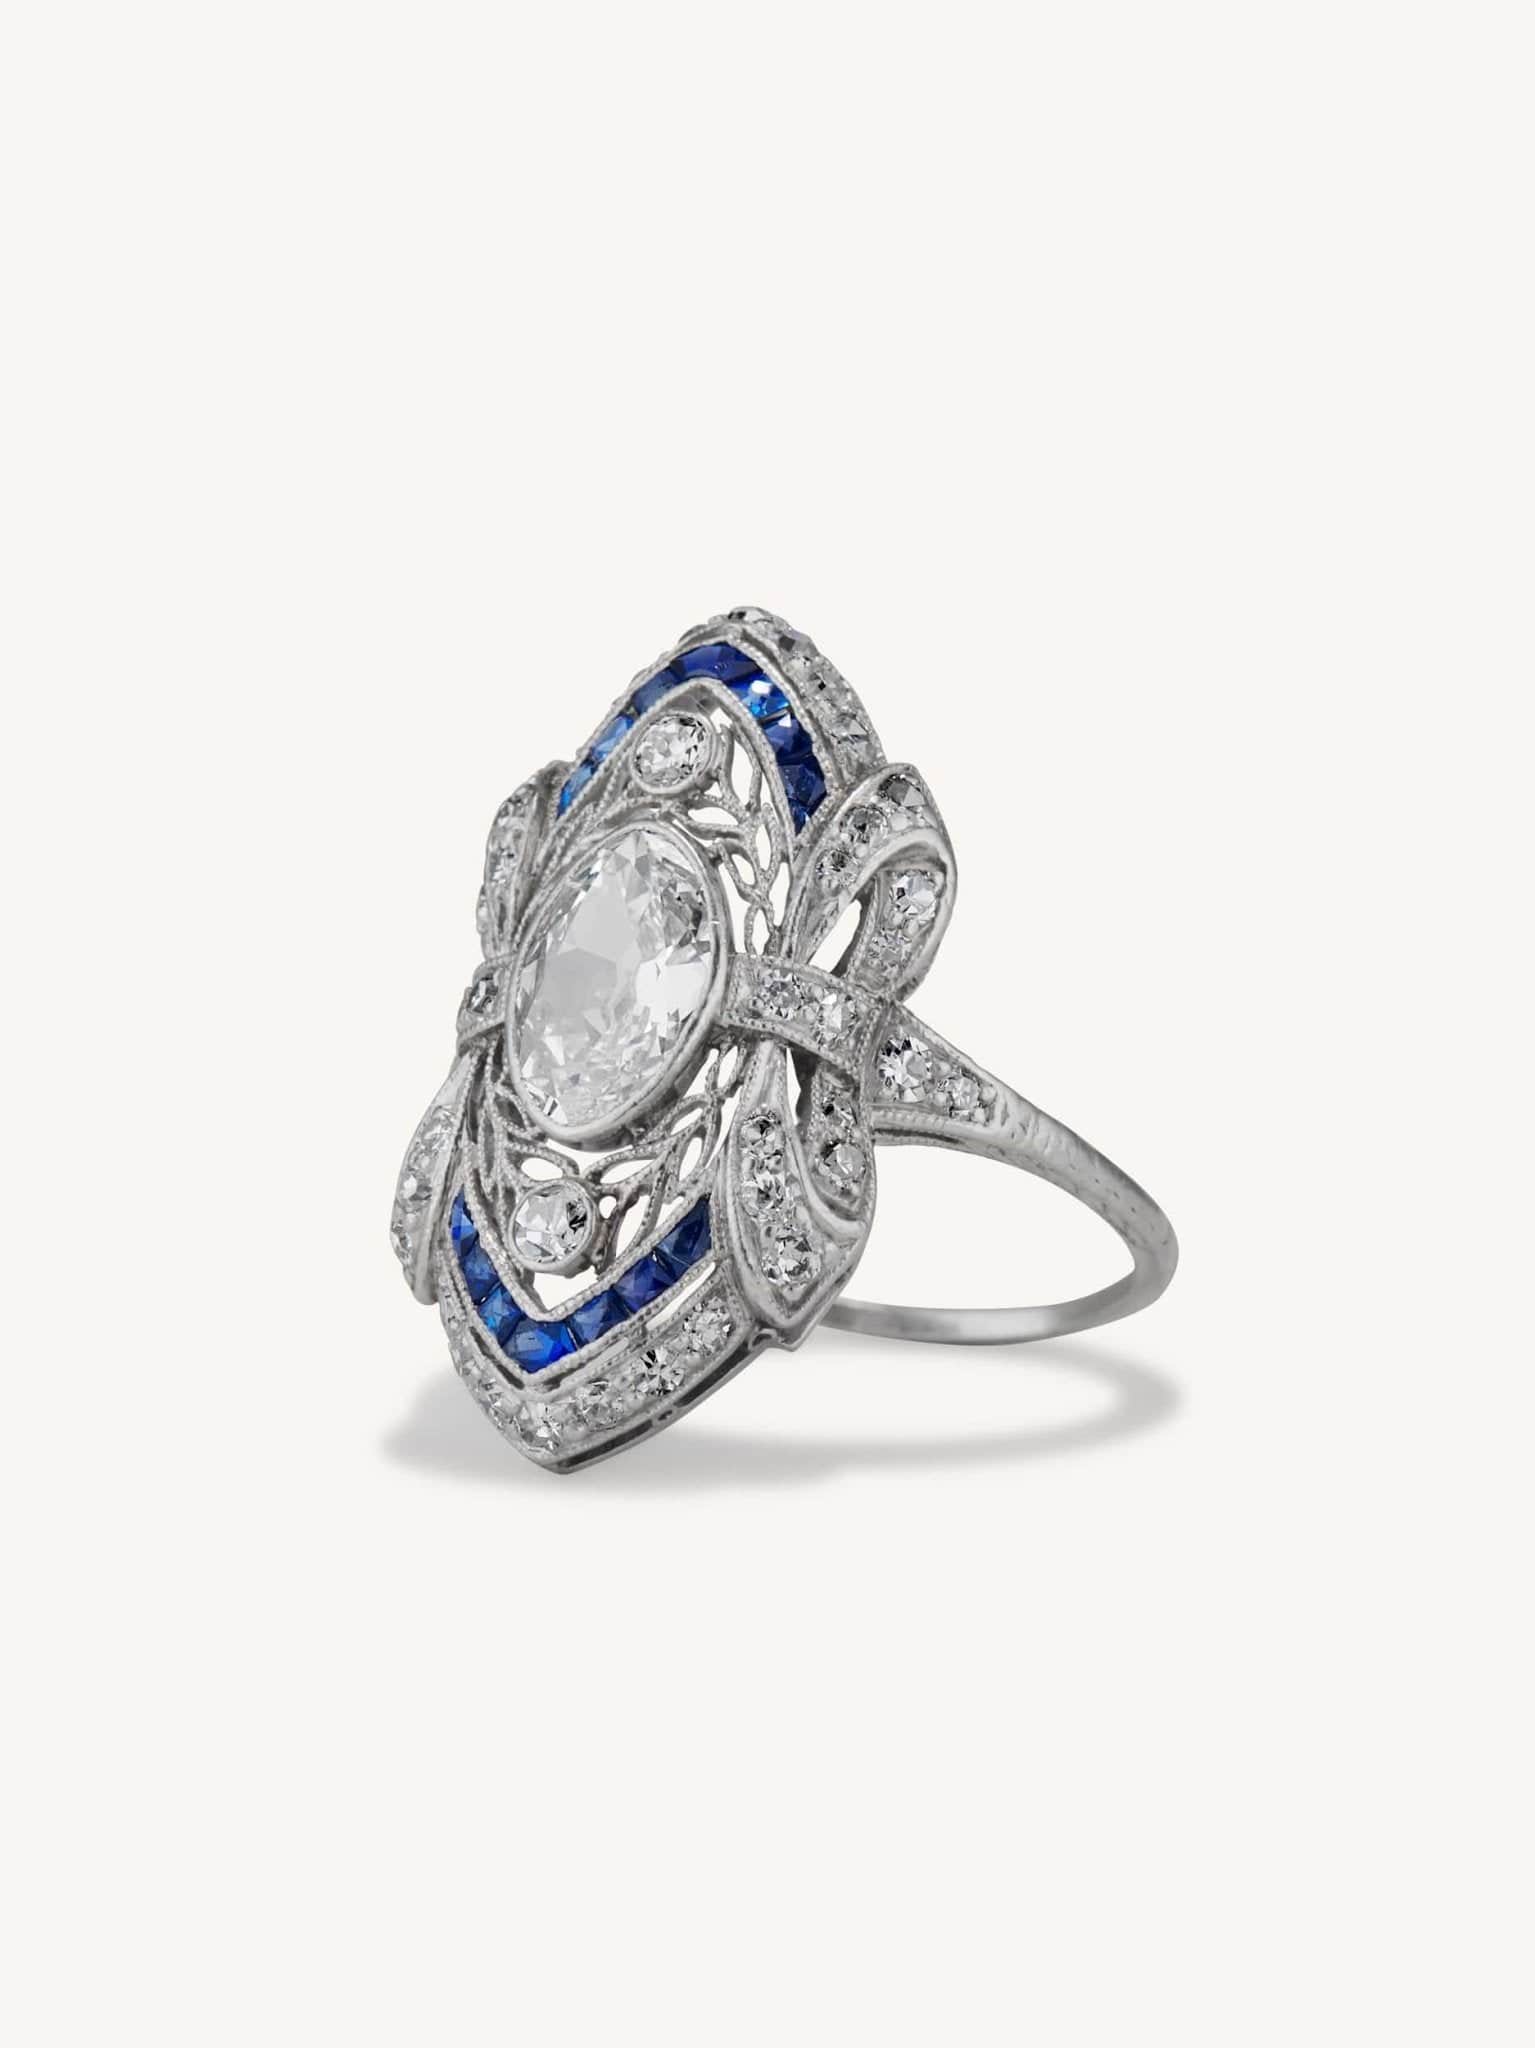 Most Popular Diamond Shapes for Engagement Rings | Shreve & Co. Jewelers